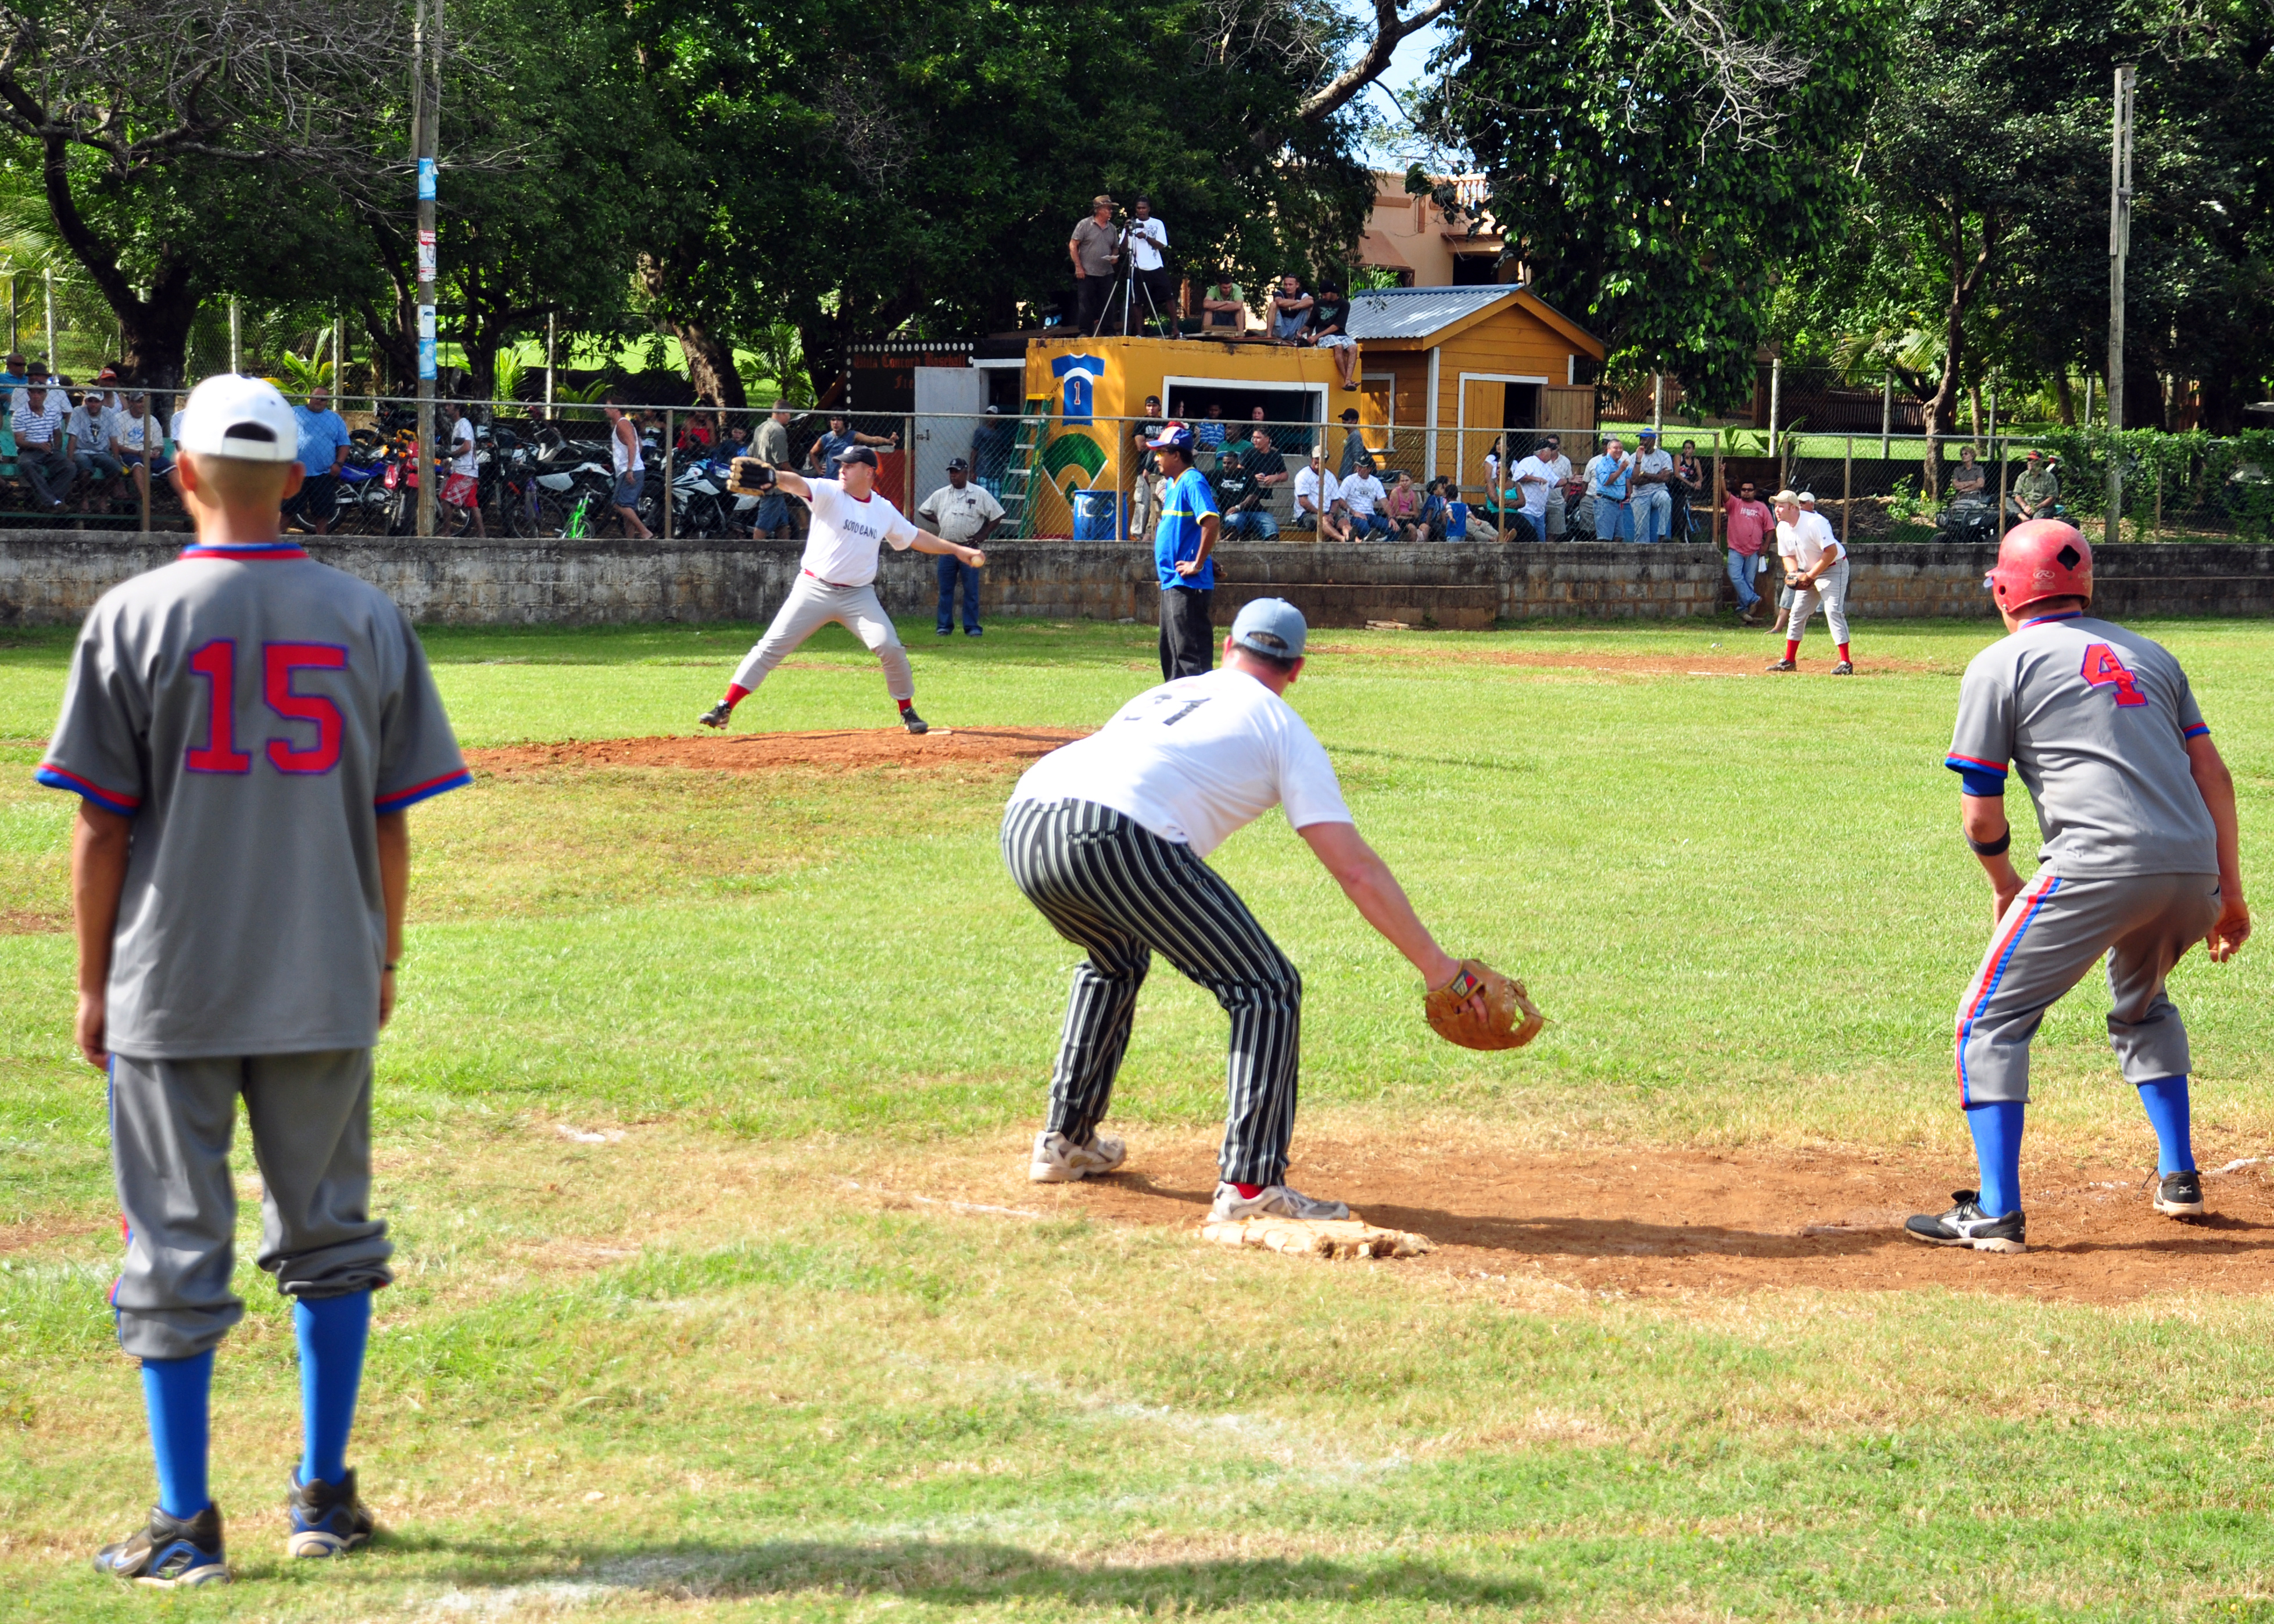 Project Béisbol  Empowering underserved youth in Latin America